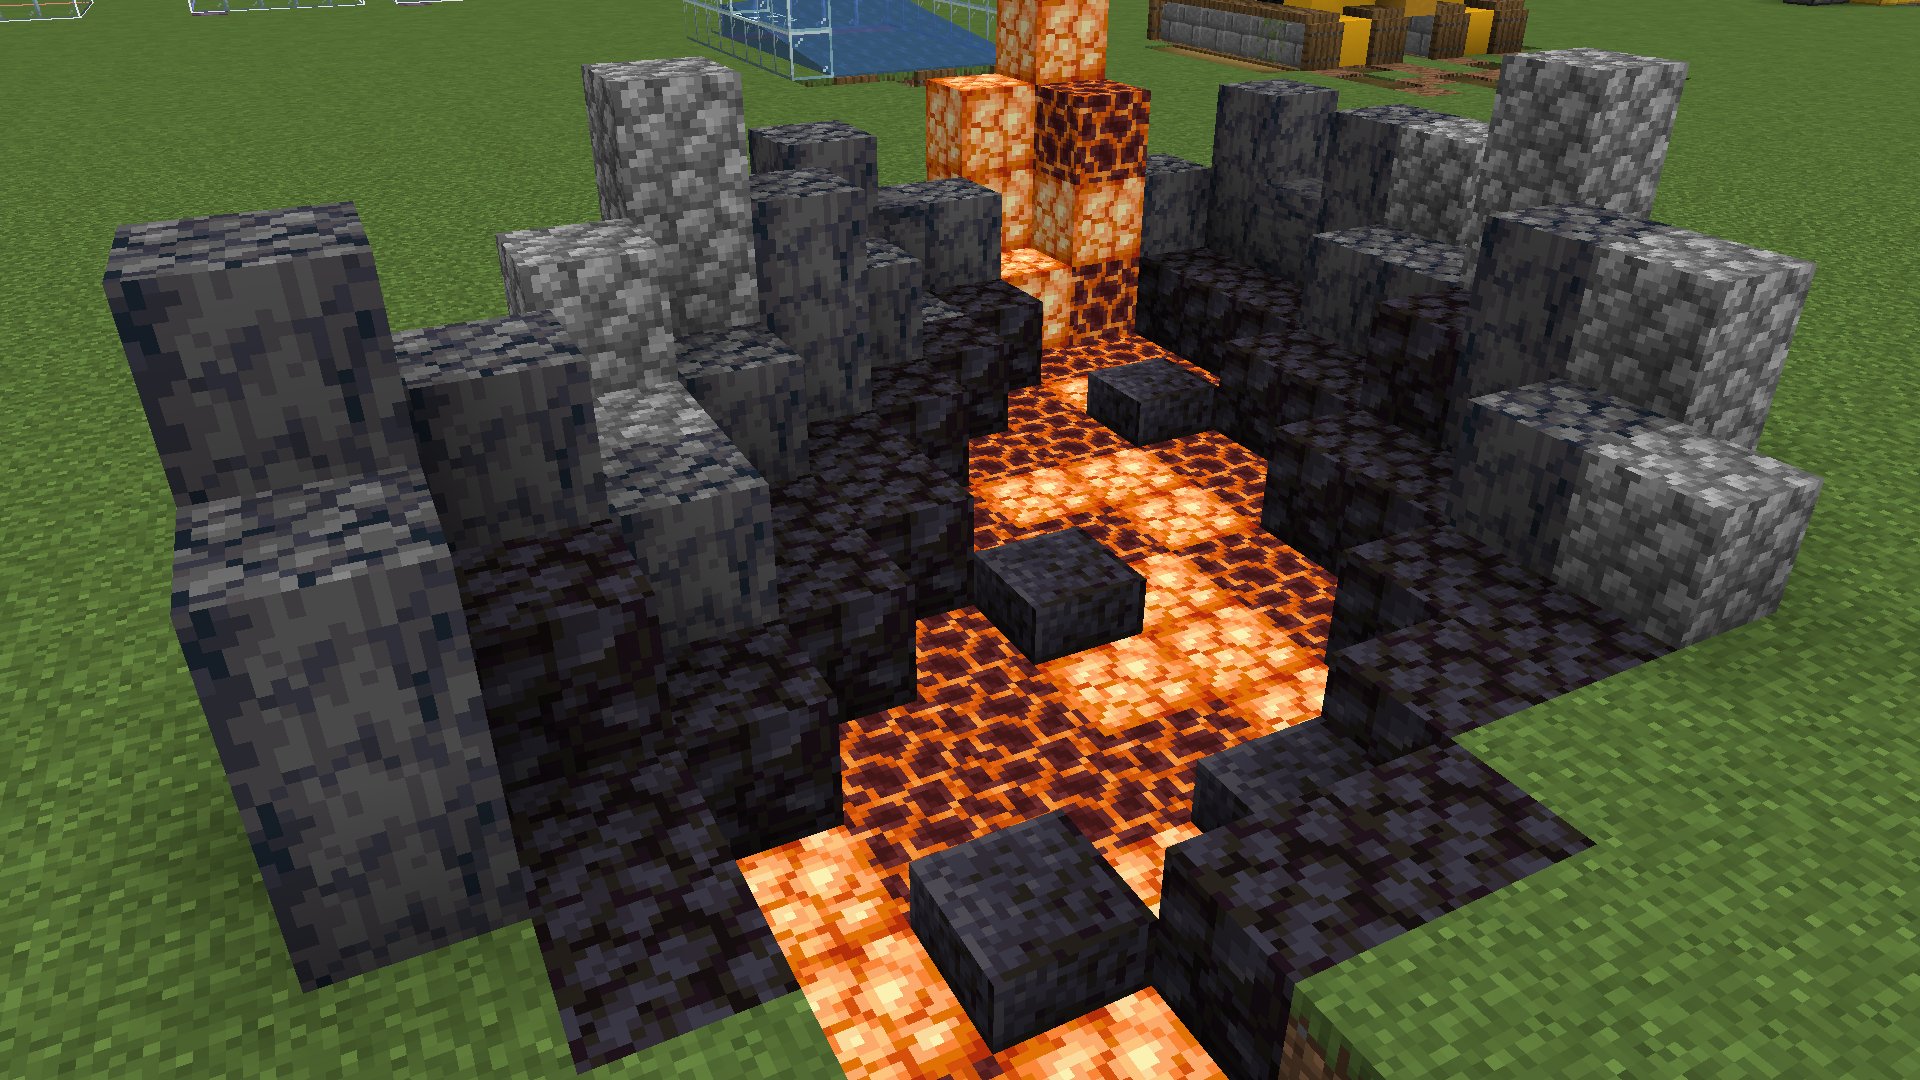 Pixlriffs 🎮 on Twitter: "Shroomlights mix well with magma blocks as a  fill-in for lava flows when you don't want to use lava!  https://t.co/PzAIJhWMir" / Twitter